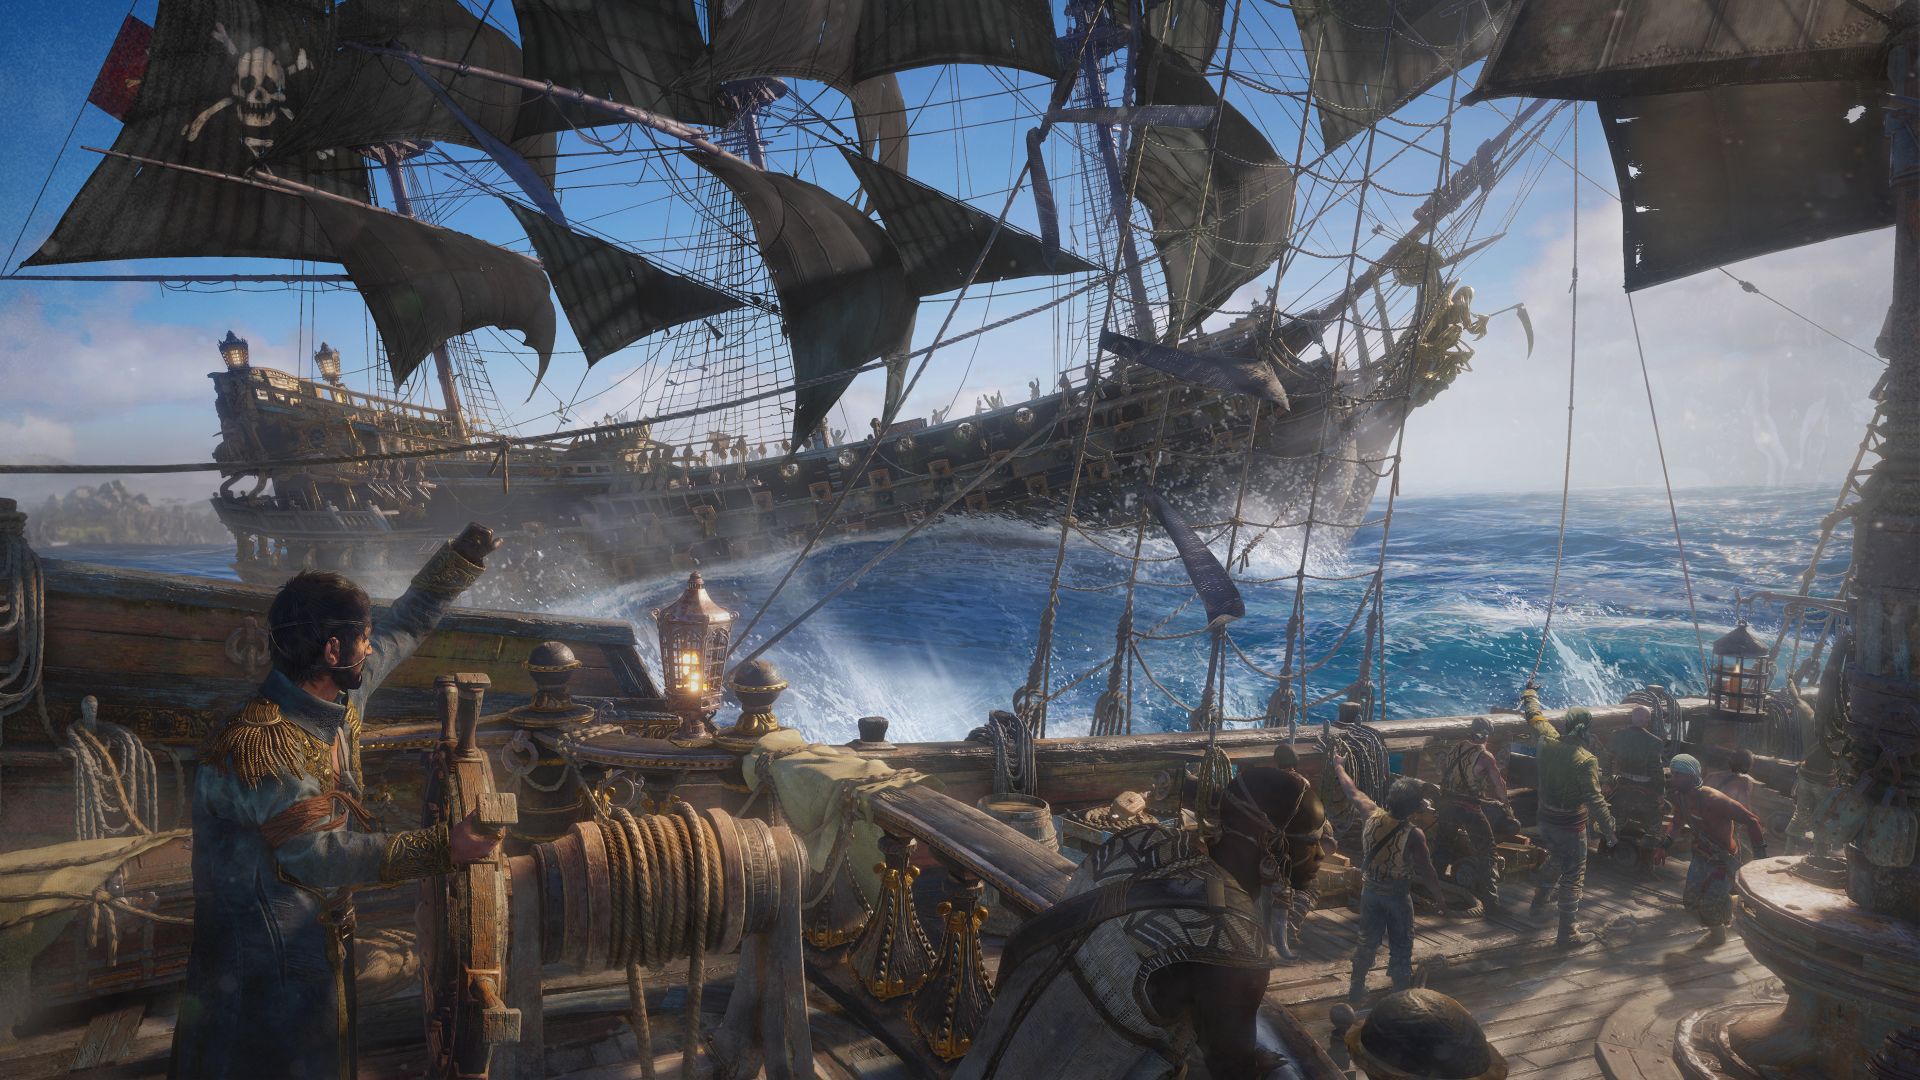 Skull & Bones development is going well and it has a planned release  window